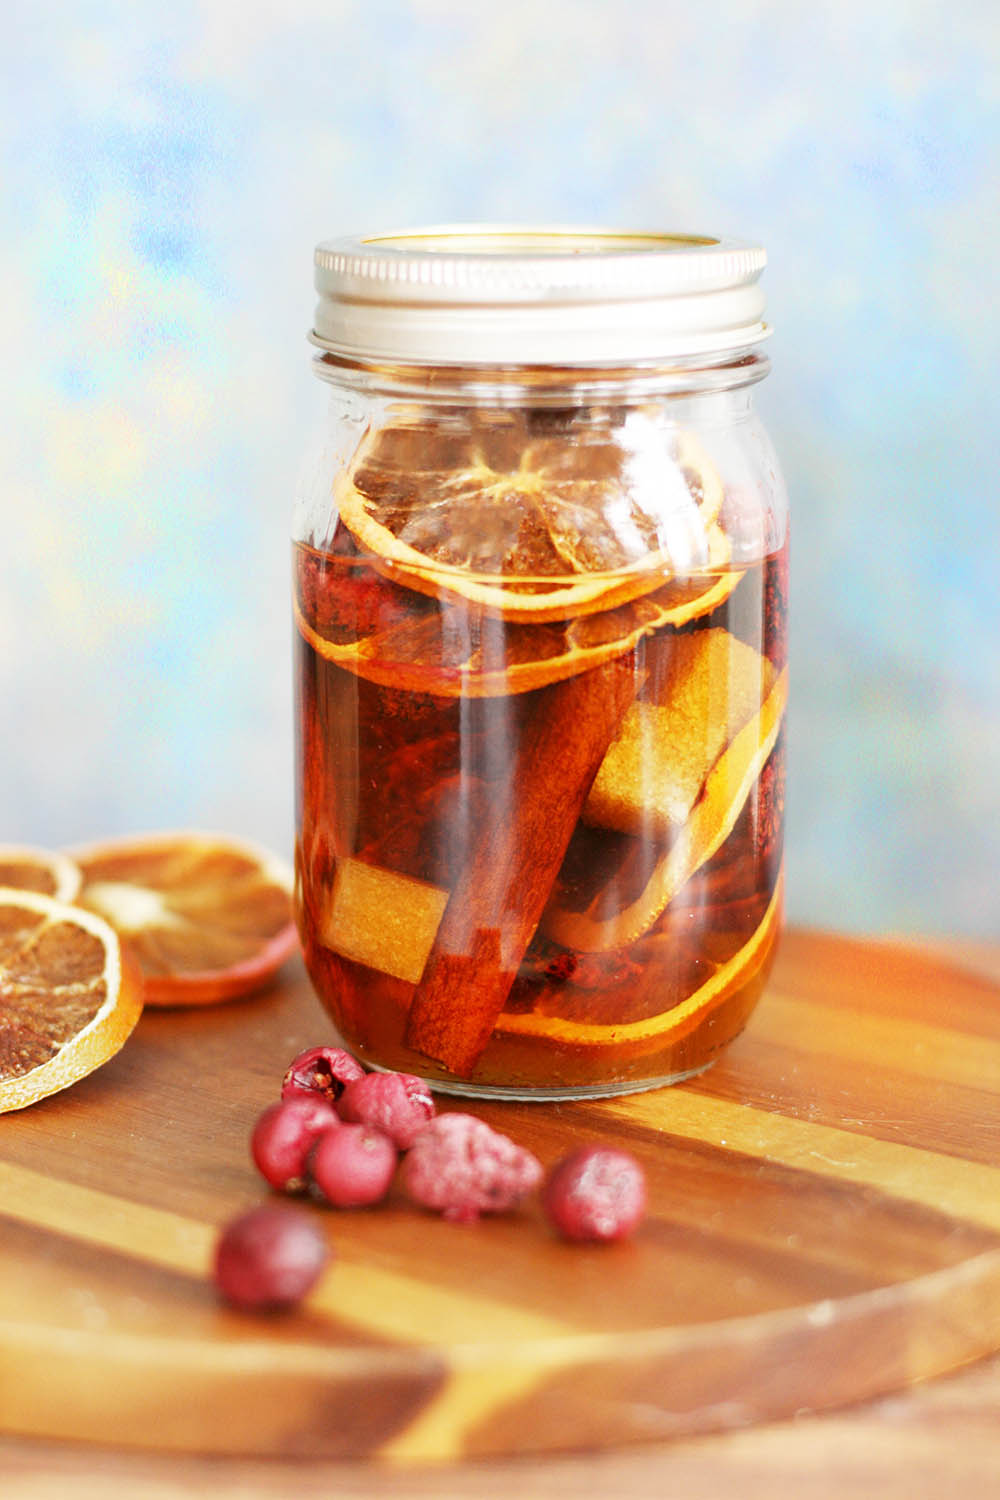 DIY cocktails in a jar: Dried fruit and spices + alcohol = a homemade cocktail at home!